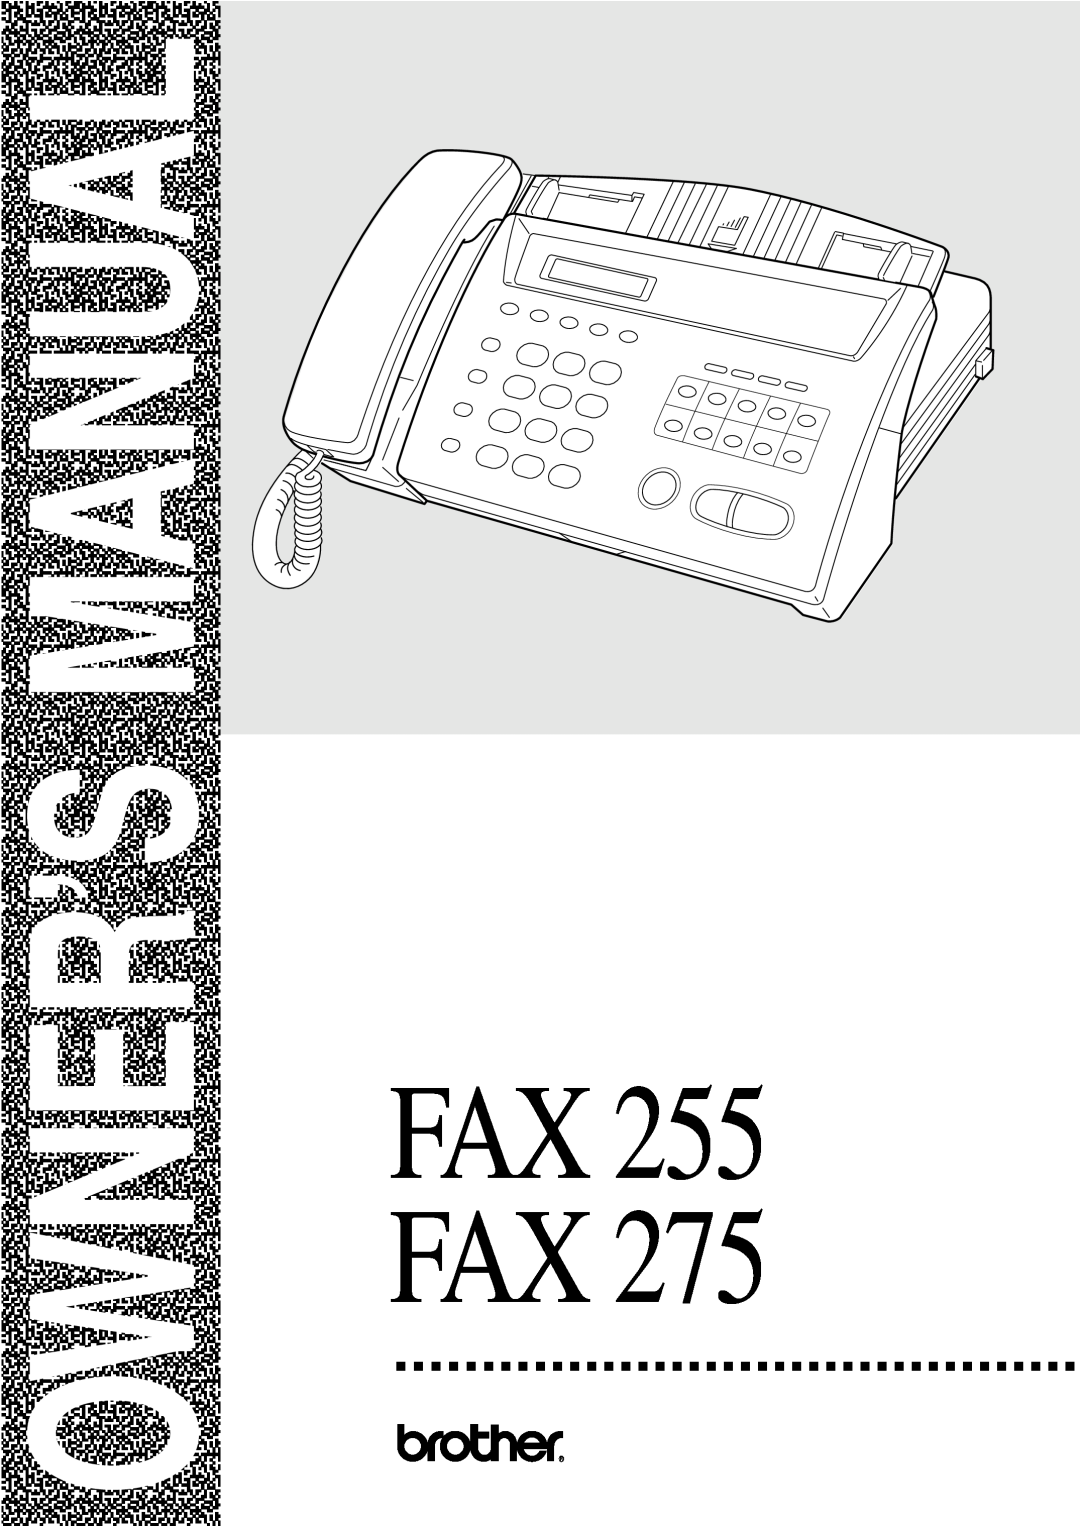 Brother owner manual Owner’S Manual, FAX 255 FAX 